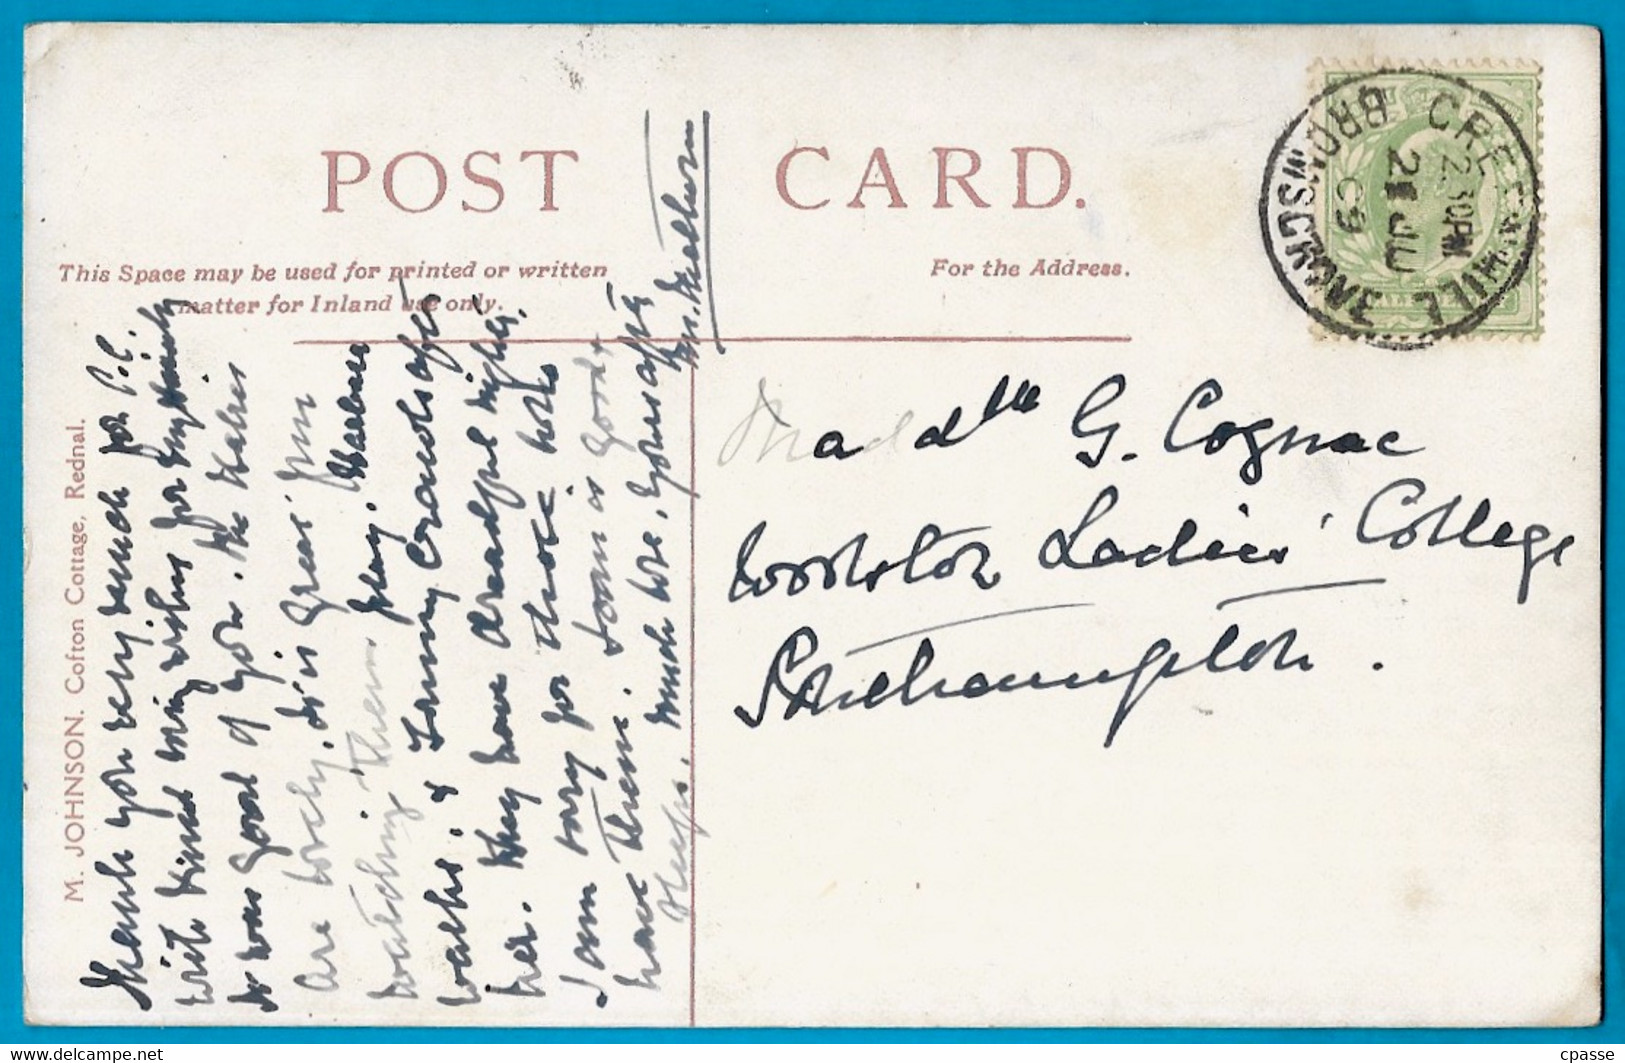 CPA Post Card - GREENHILL POST OFFICE BLACKWELL - Bromsgrove